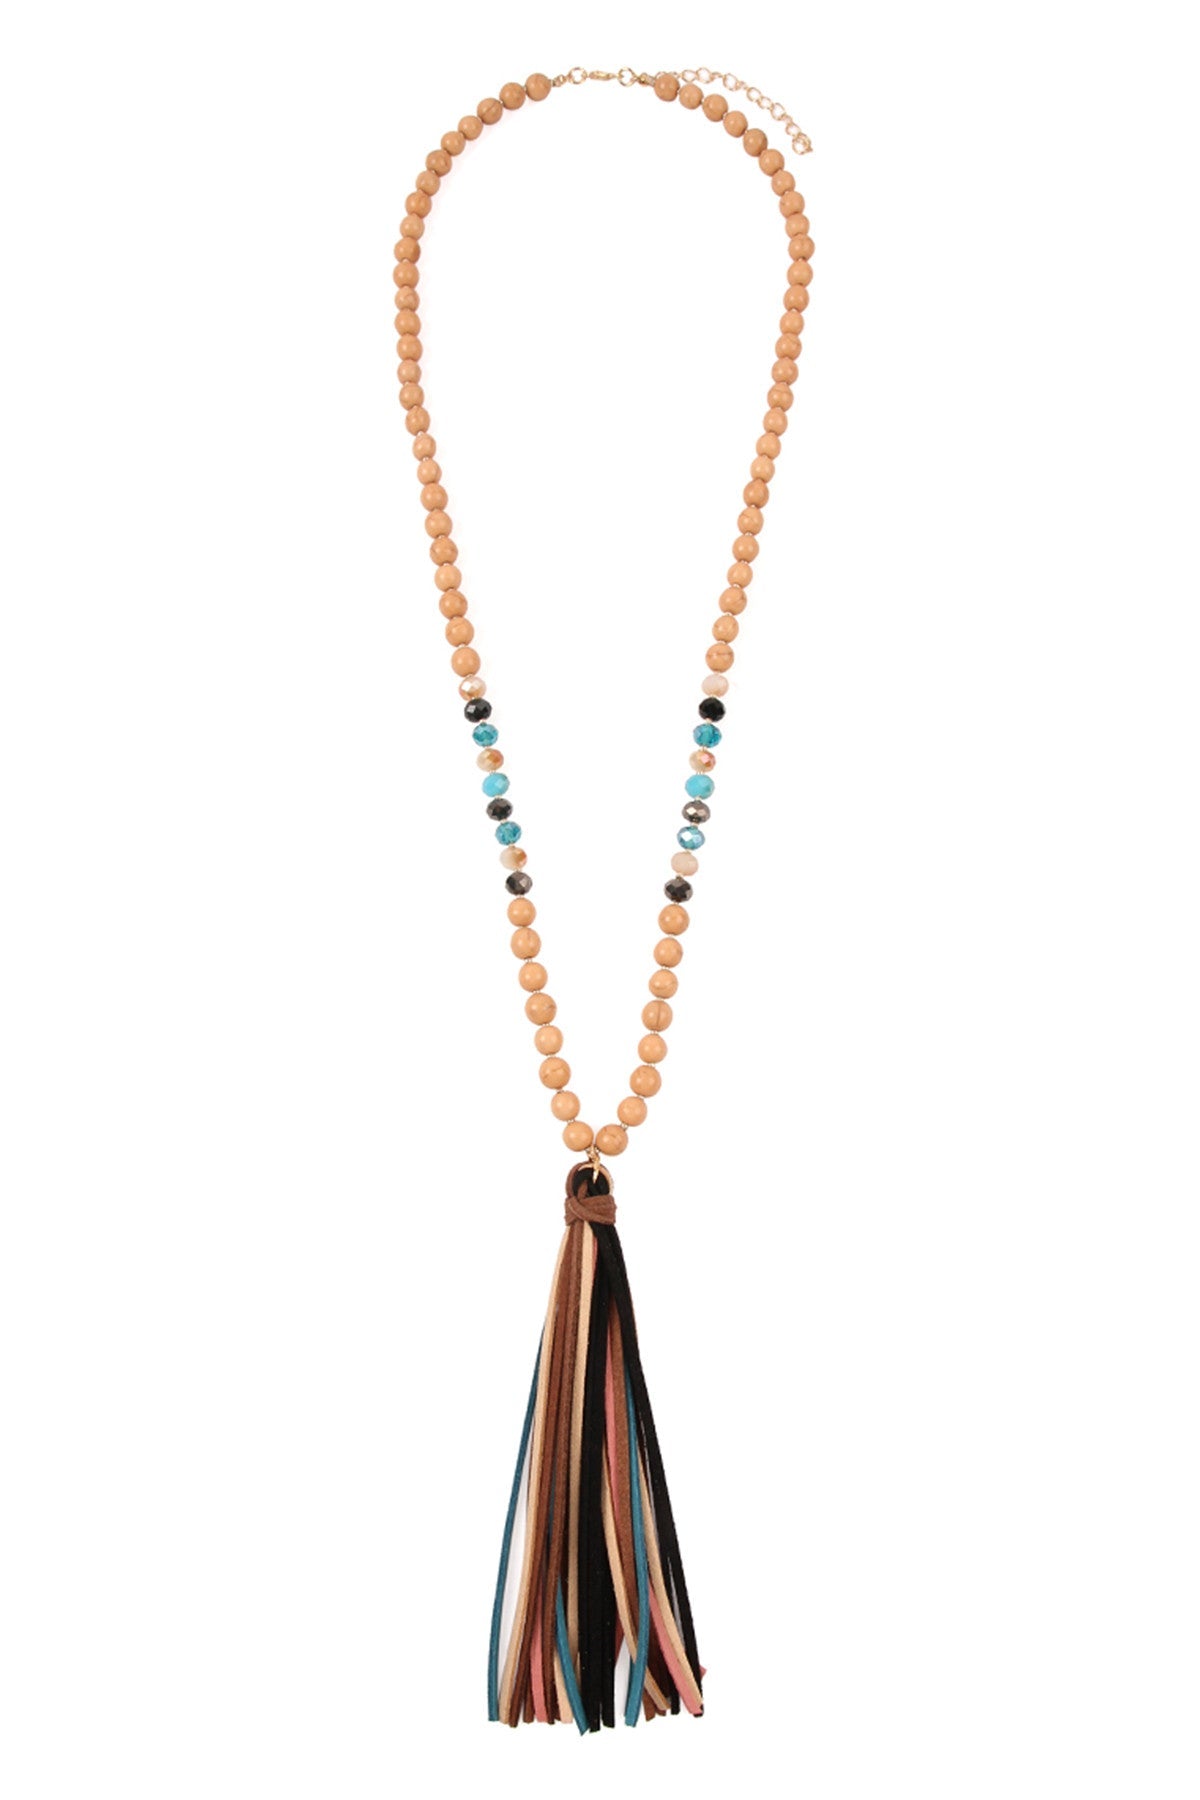 COLORFUL NATURAL STONE AND GLASS BEADS WITH TASSEL NECKLACE